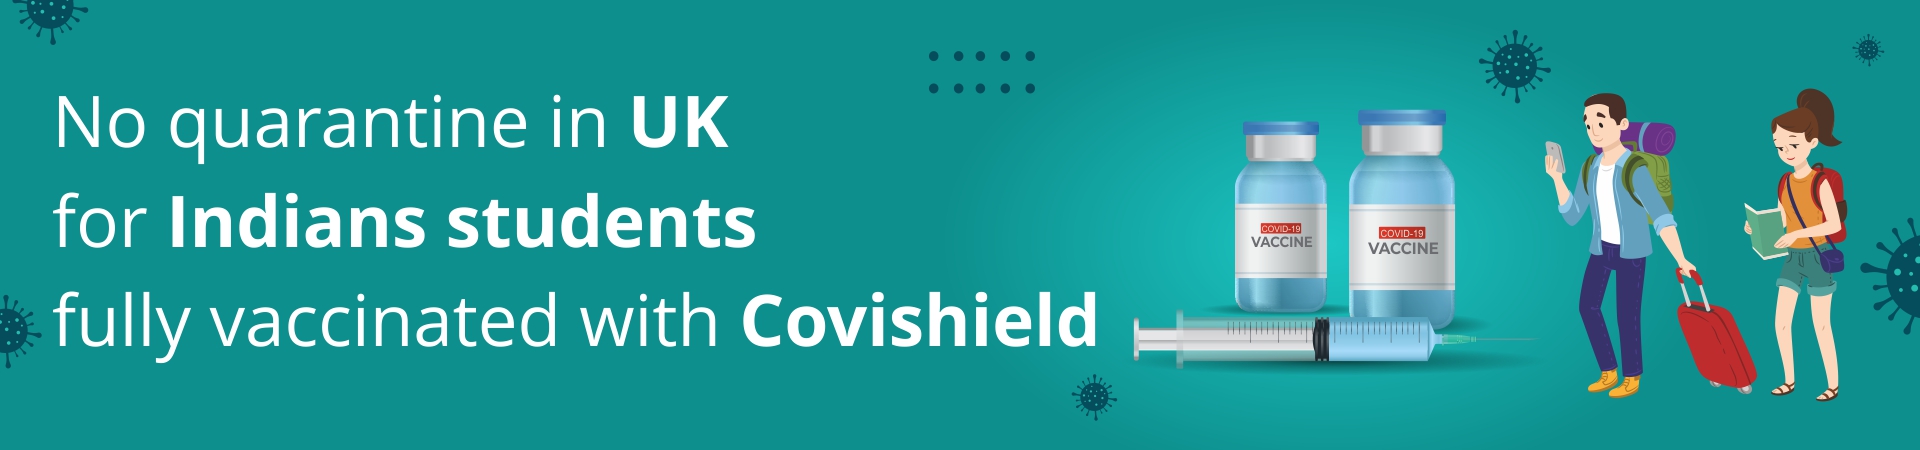 No quarantine in UK for Indians students fully vaccinated with Covishield